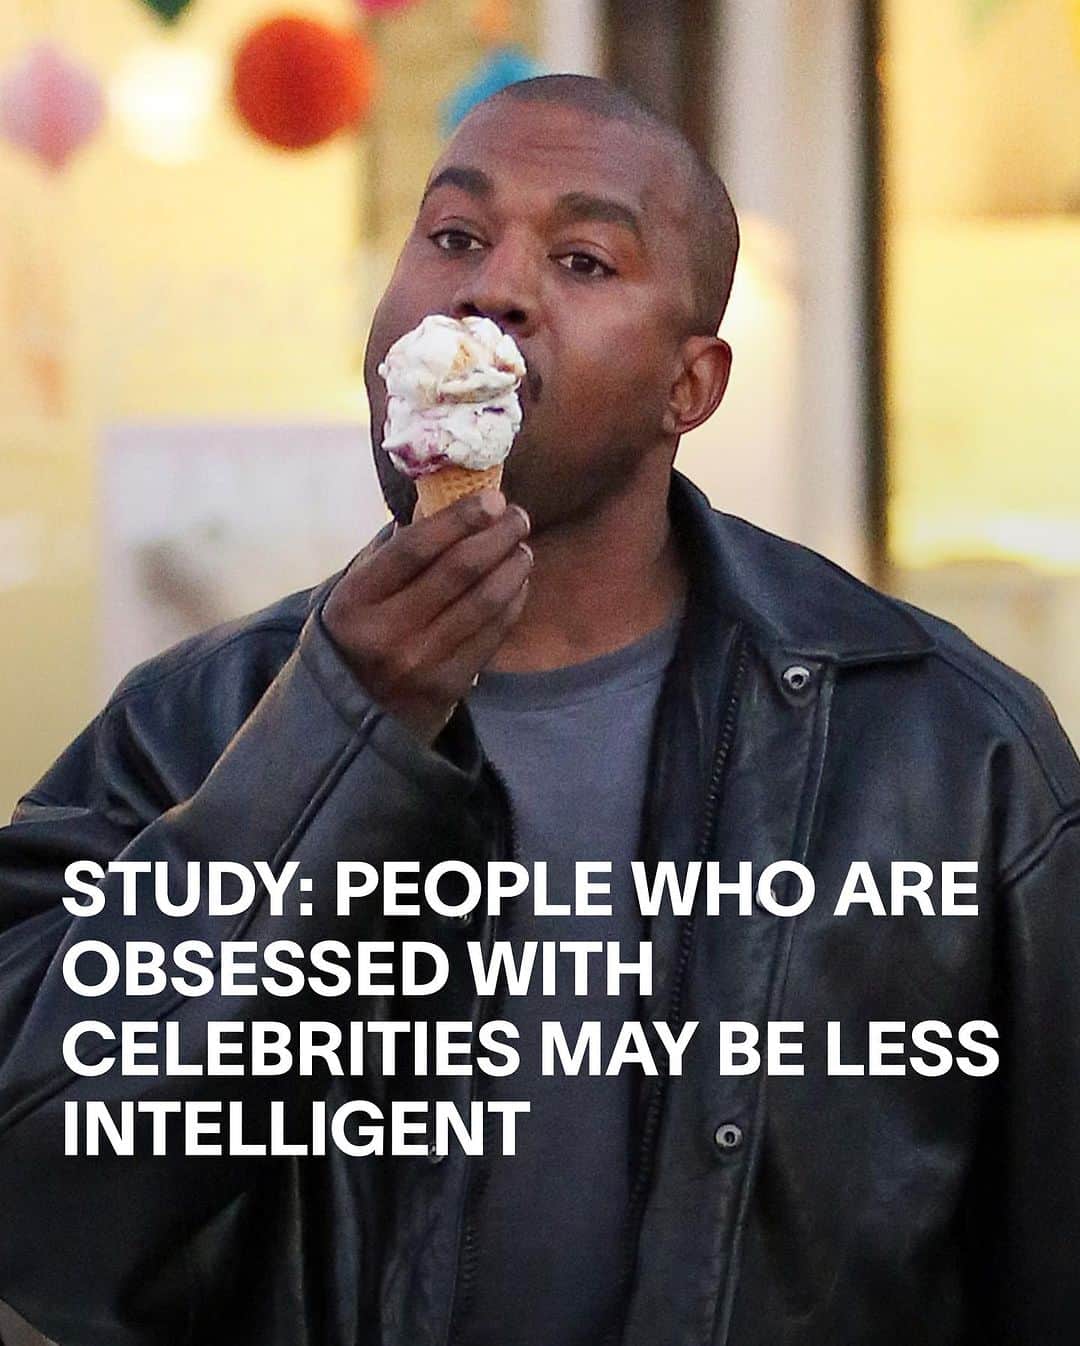 VICEのインスタグラム：「Surprise! People who are obsessed with celebrities and their lives may be less intelligent, new research suggests.   The study, published in BMC Psychology, asked 1,763 adults to complete a survey regarding their attitudes toward celebrities, and complete a set of cognitive tasks to determine their intelligence. The team found a “direct association between celebrity worship and poorer performance on cognitive tests,” but were unable to determine the cause and effect of the link.  “Although our research does not prove that developing a powerful obsession with one’s favorite celebrity causes one to score lower on cognitive tests, it suggests that it might be wise to carefully monitor feelings for [them],” the researchers said. So there you have it, folks. That friend who’s excessively interested in what that one supermodel ate one day may actually be less intelligent—we just don’t know what came first.」